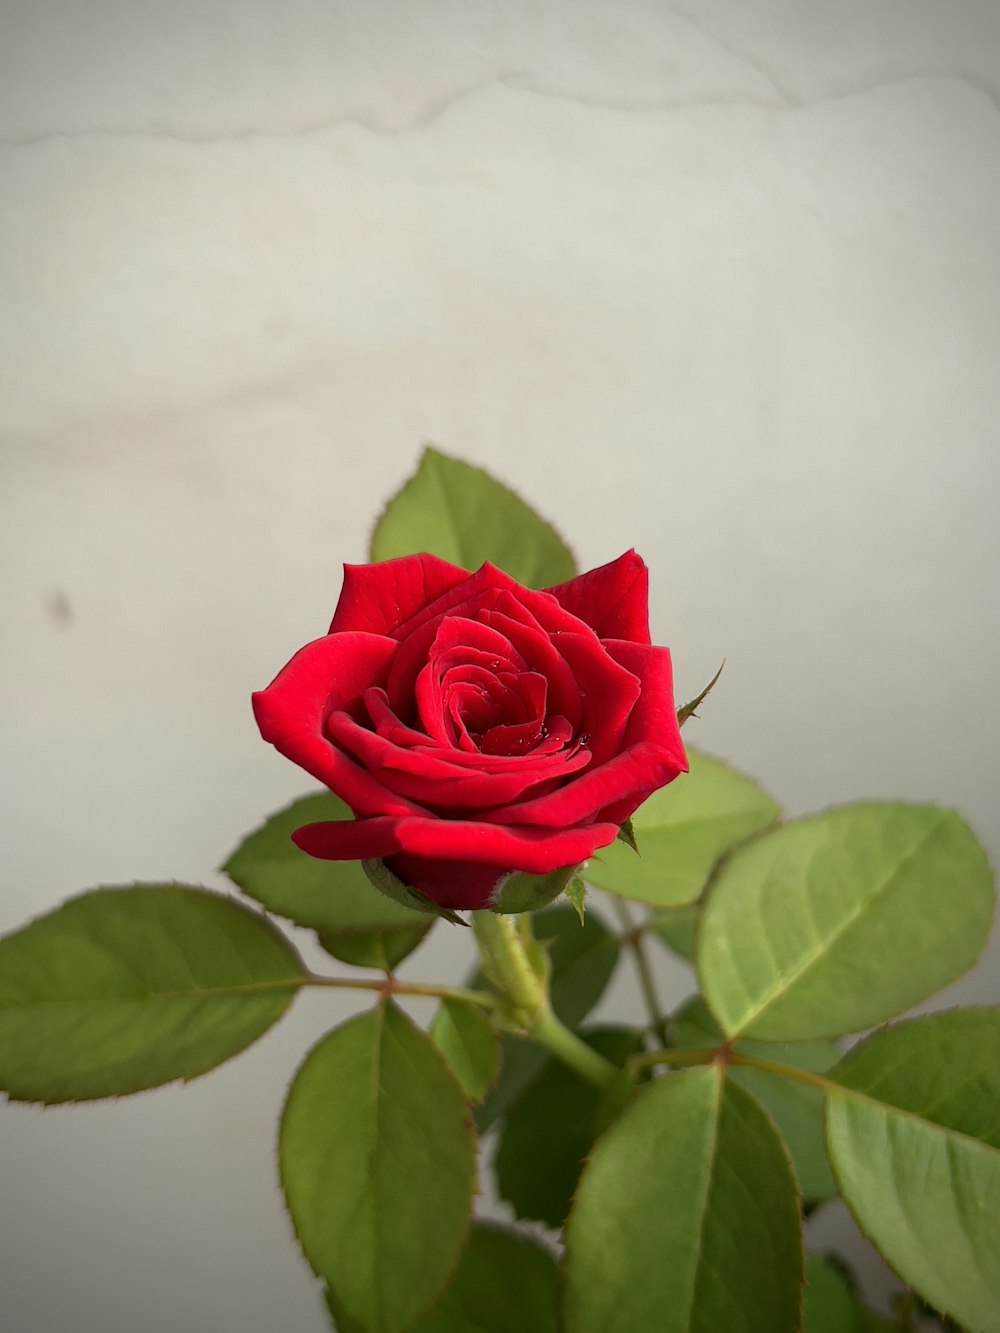 a single red rose with green leaves in a vase